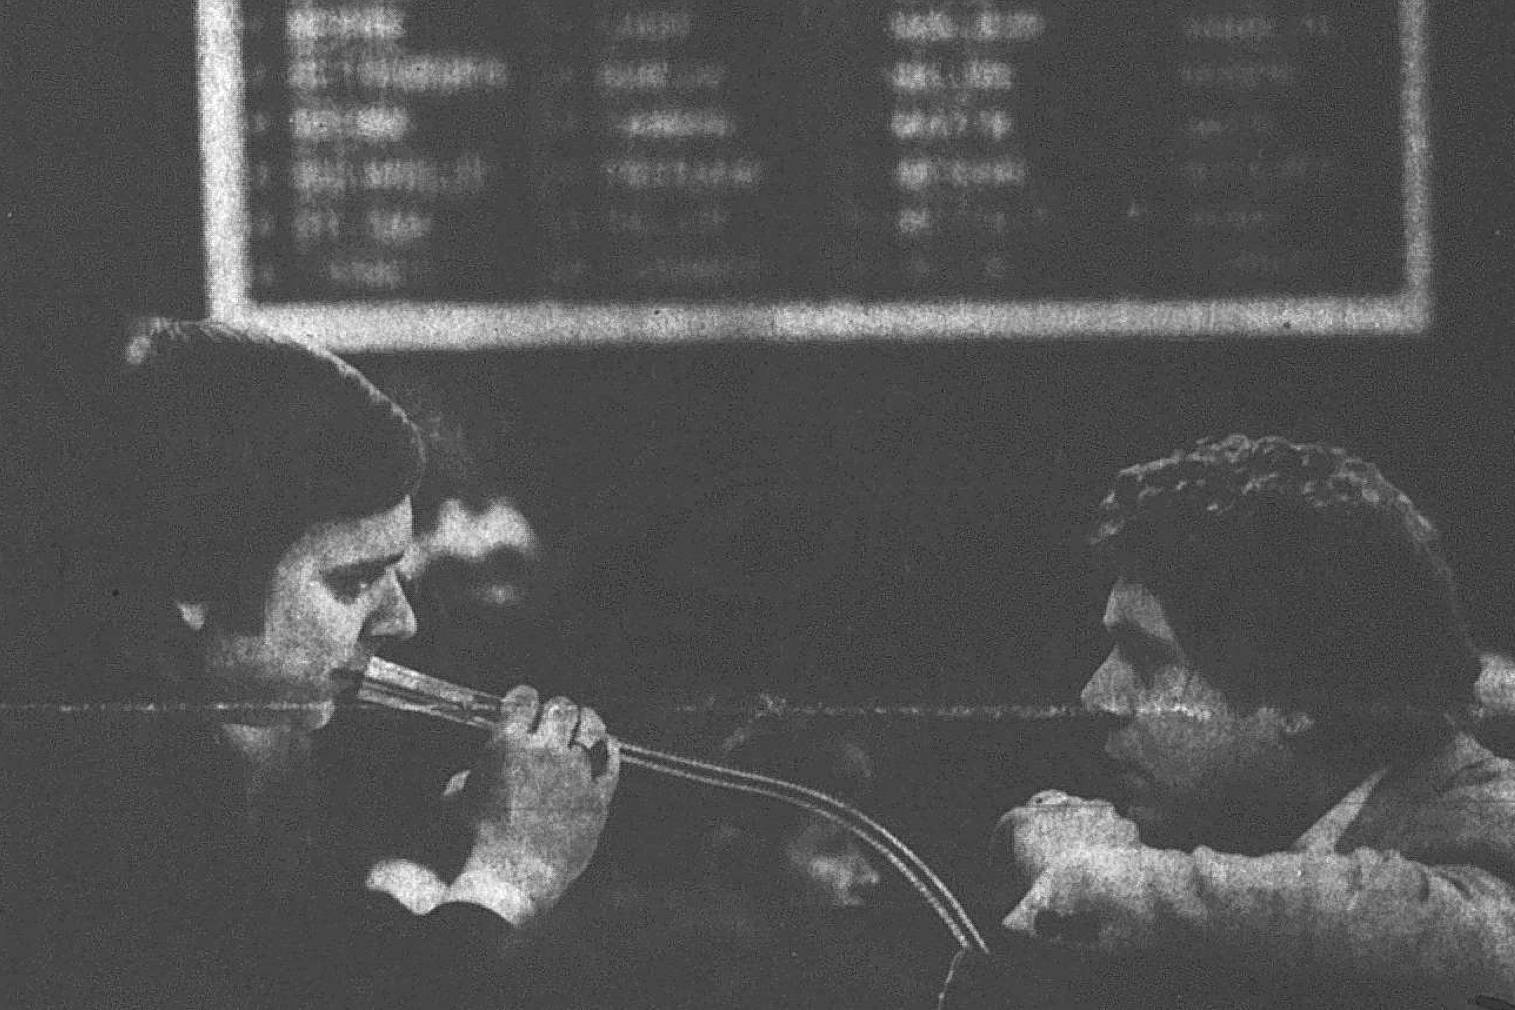 House Speaker Jim Duncan, D-Juneau, confers with Majority Leader Russ Meekins on Feb. 3, 1981, after the 22-day gridlock over House organization was broken late the previous afternoon following a series of parliamentary maneuvers. (Mark Kelley | Juneau Empire File)